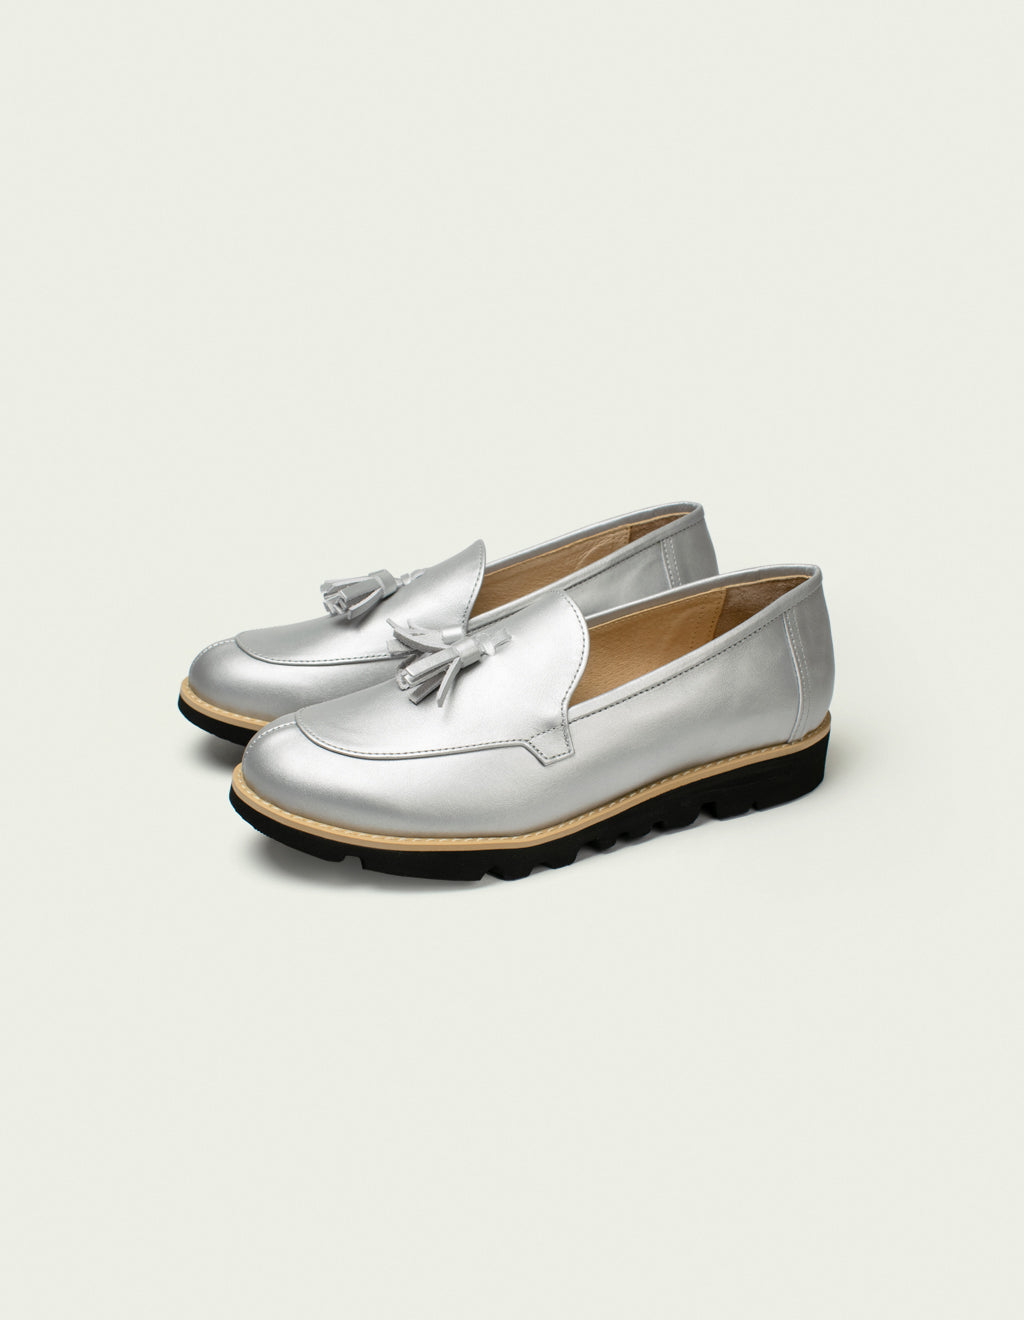 【 materi 】 a-02 | Leather Shoes | Silver